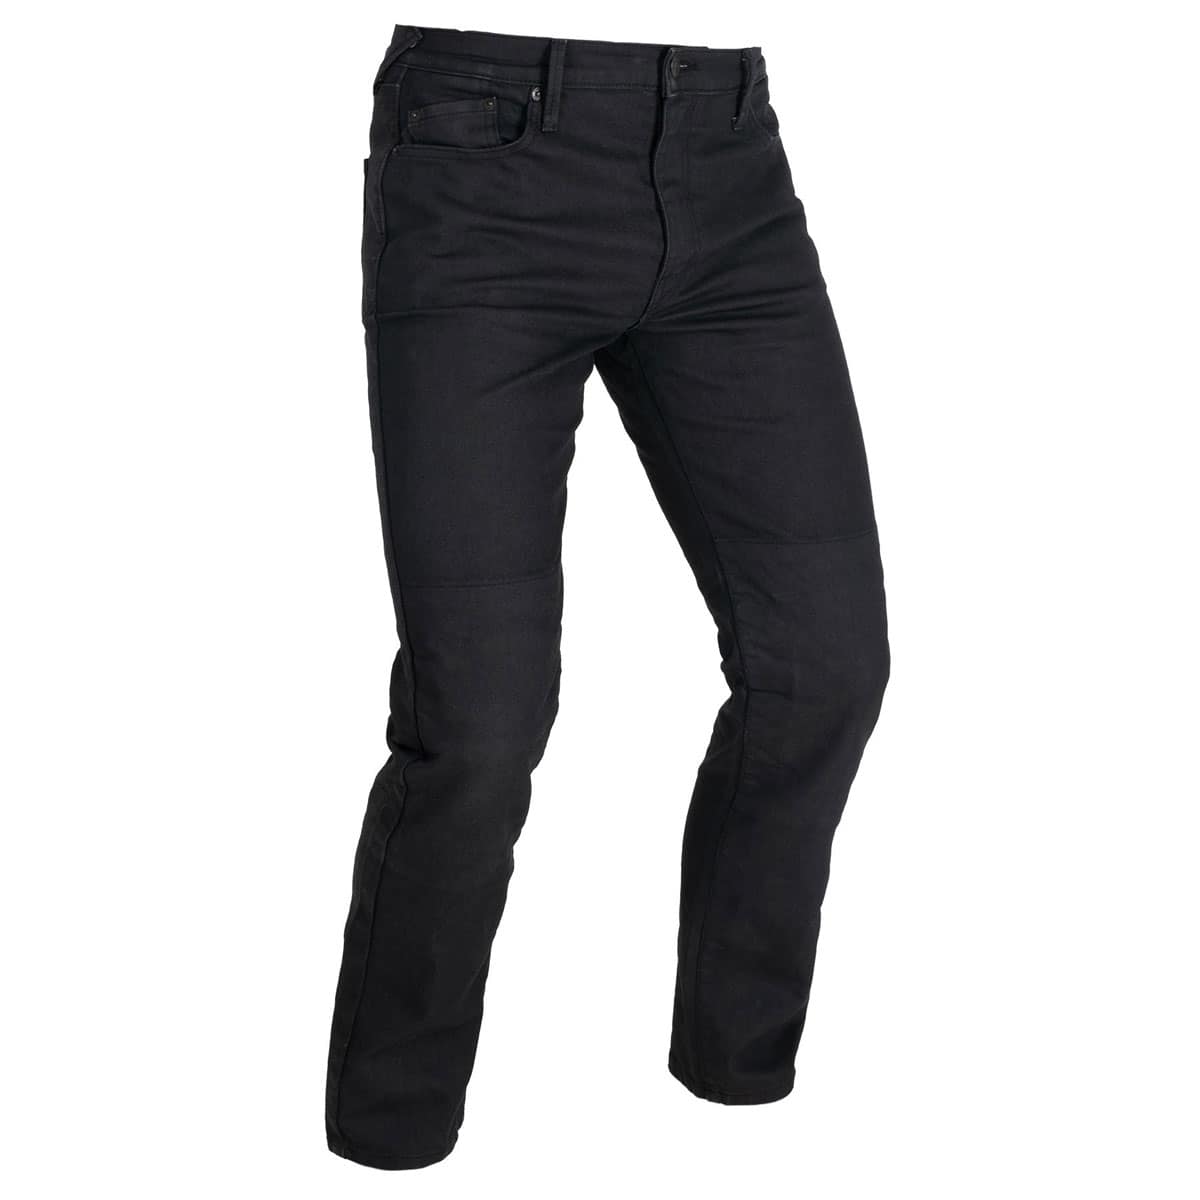 Oxford AAA Original Jeans in a straight fit: CE AAA rated single-layer motorcycle jeans